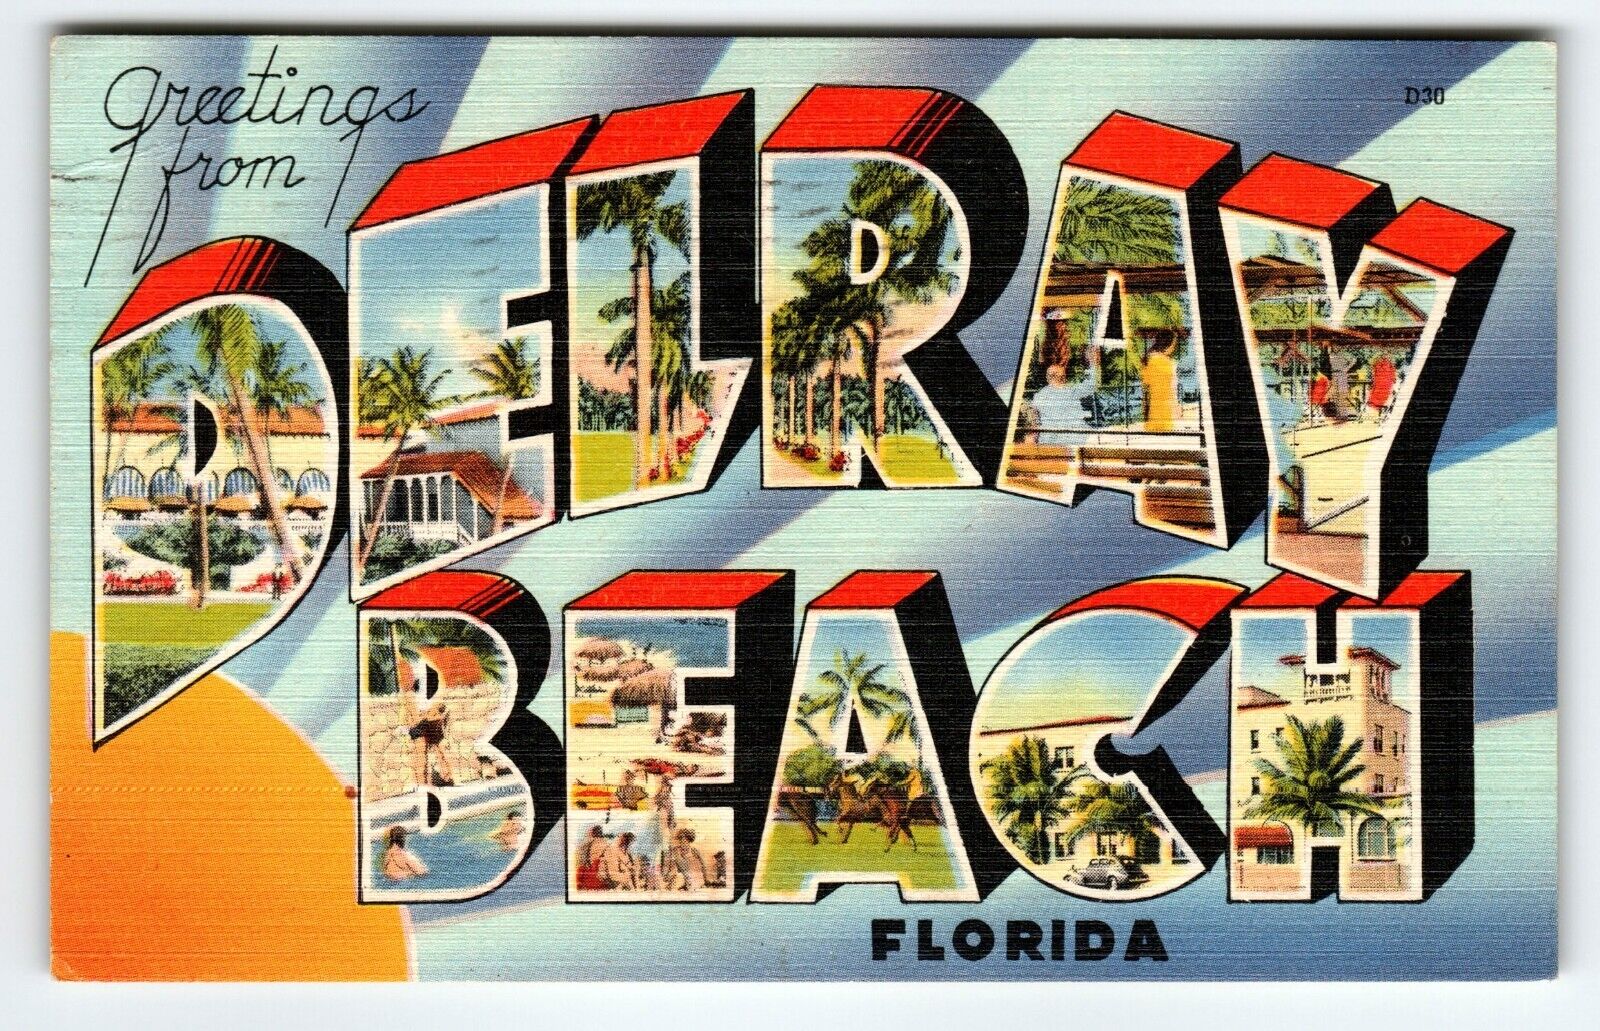 Greetings From Delray Beach Florida Large Letter Linen Postcard 1947 Tichnor